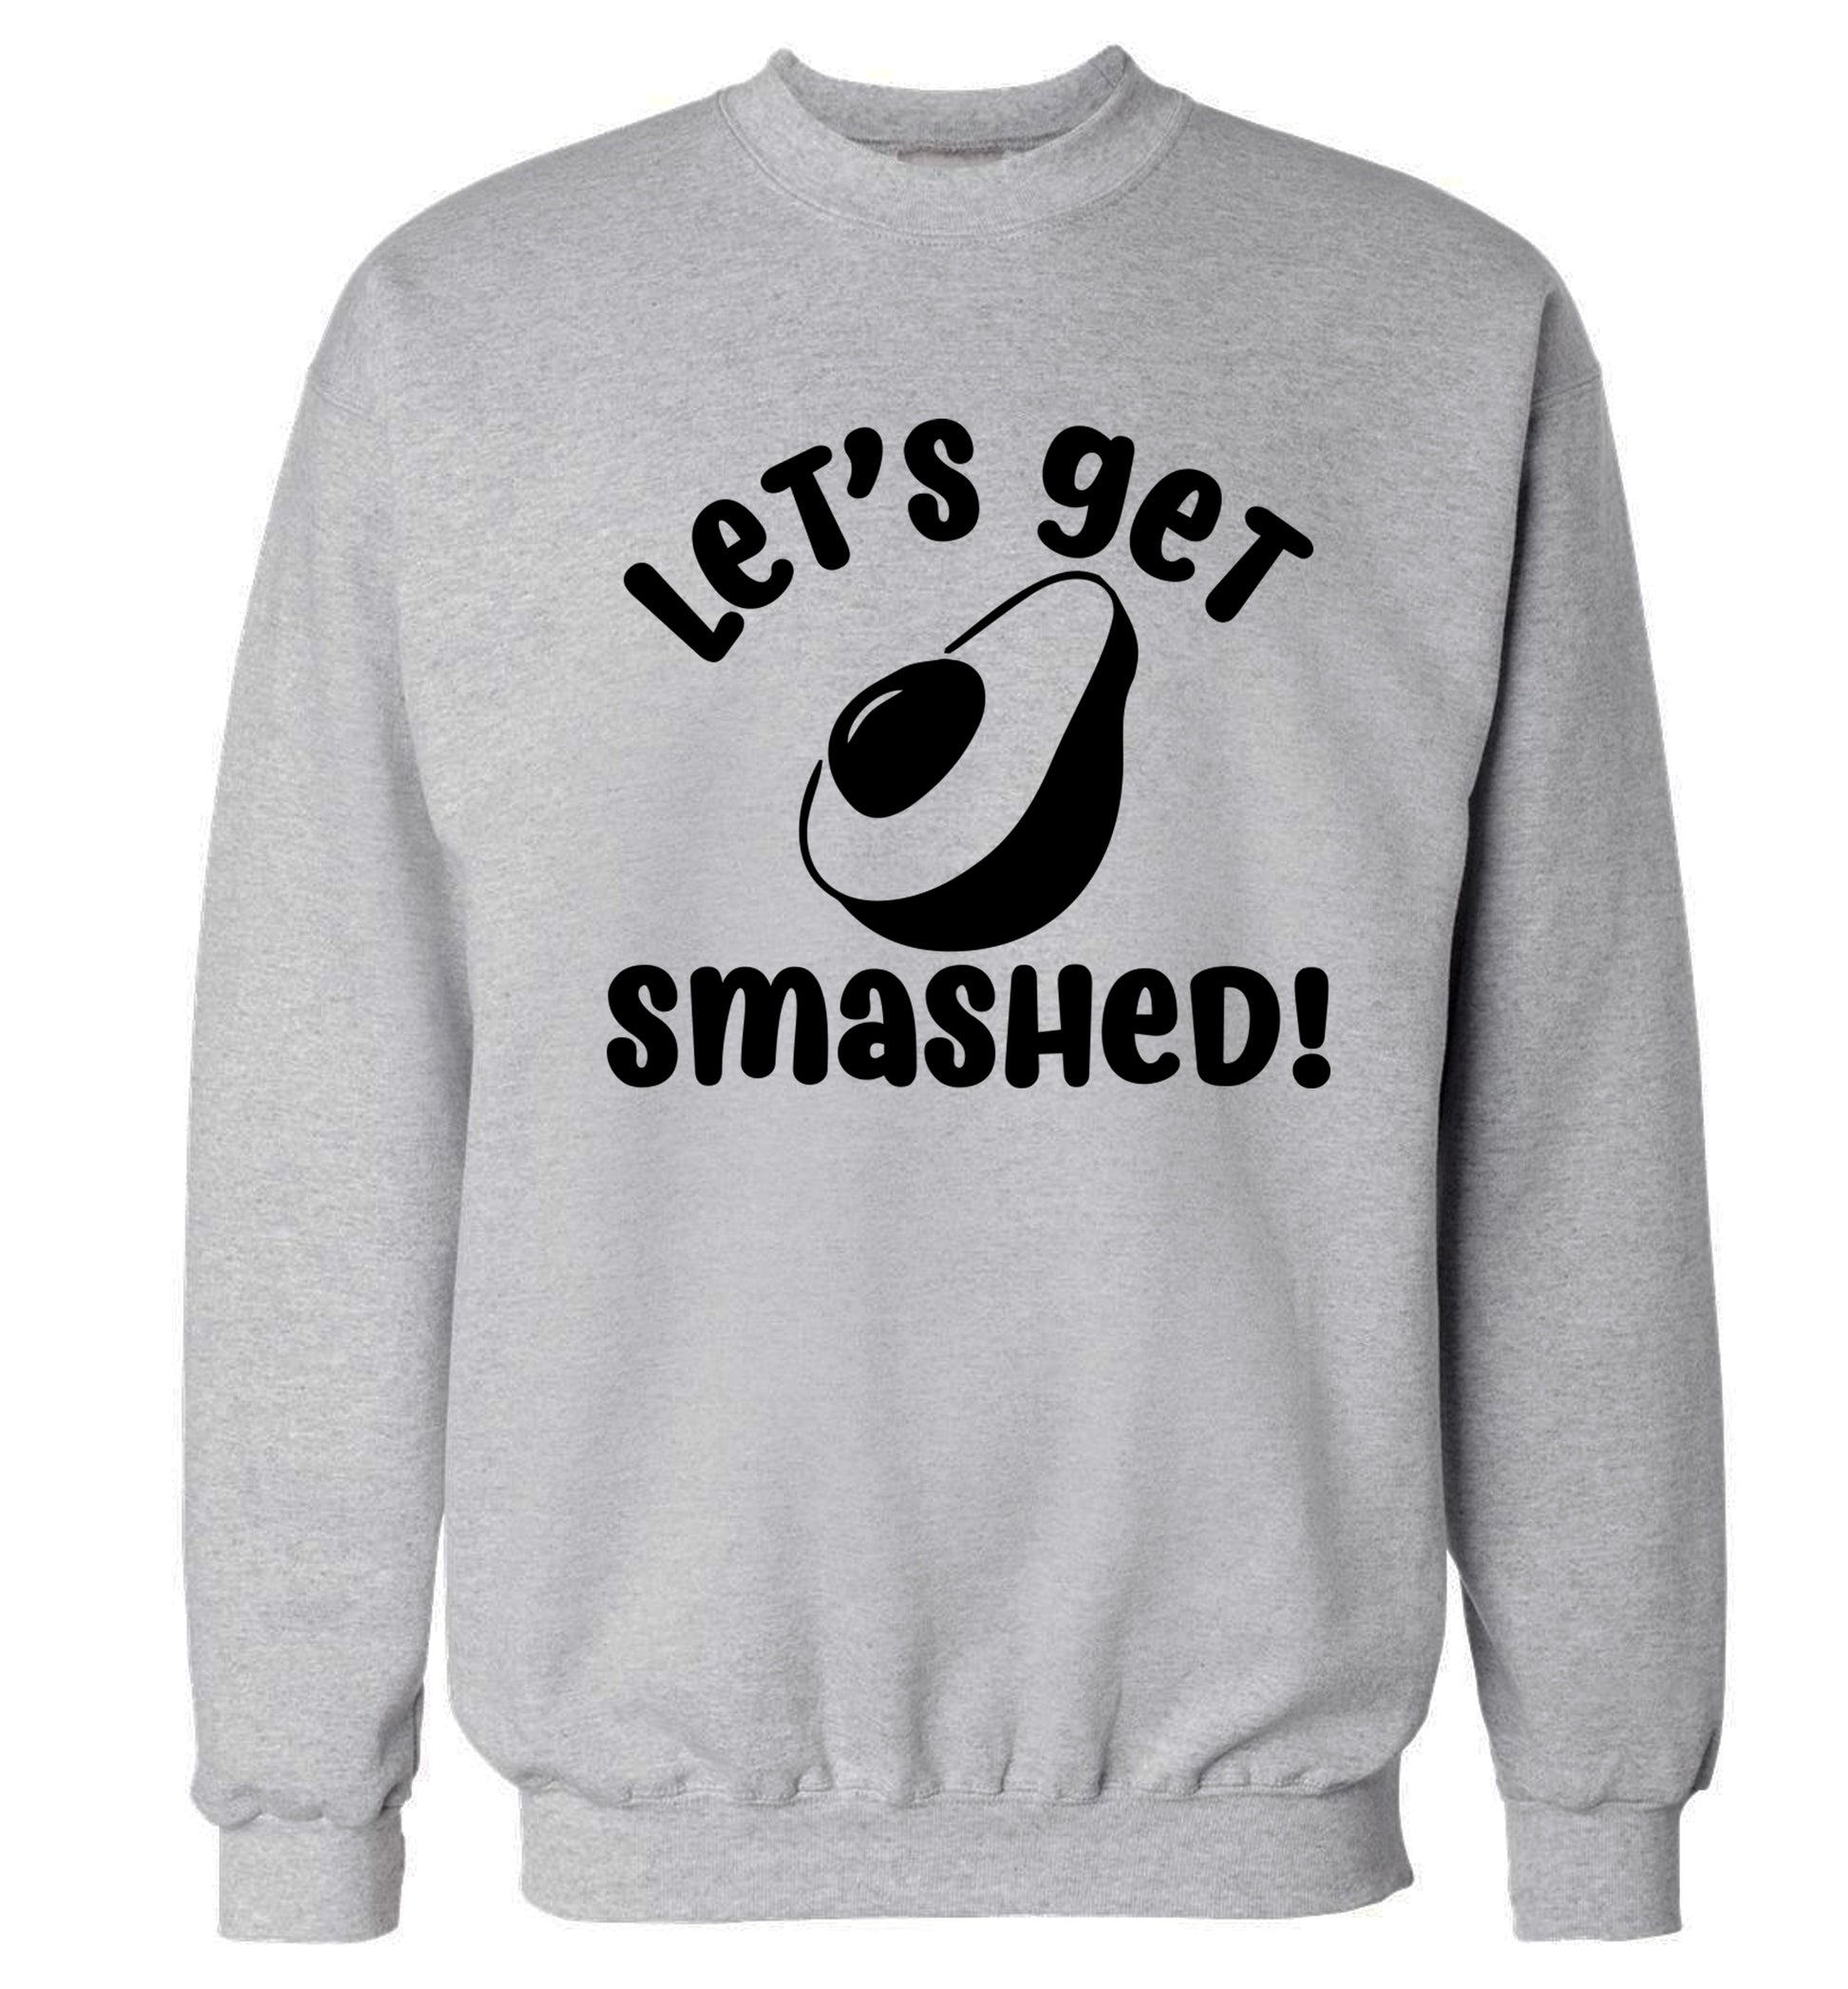 Let's get smashed Adult's unisex grey Sweater 2XL